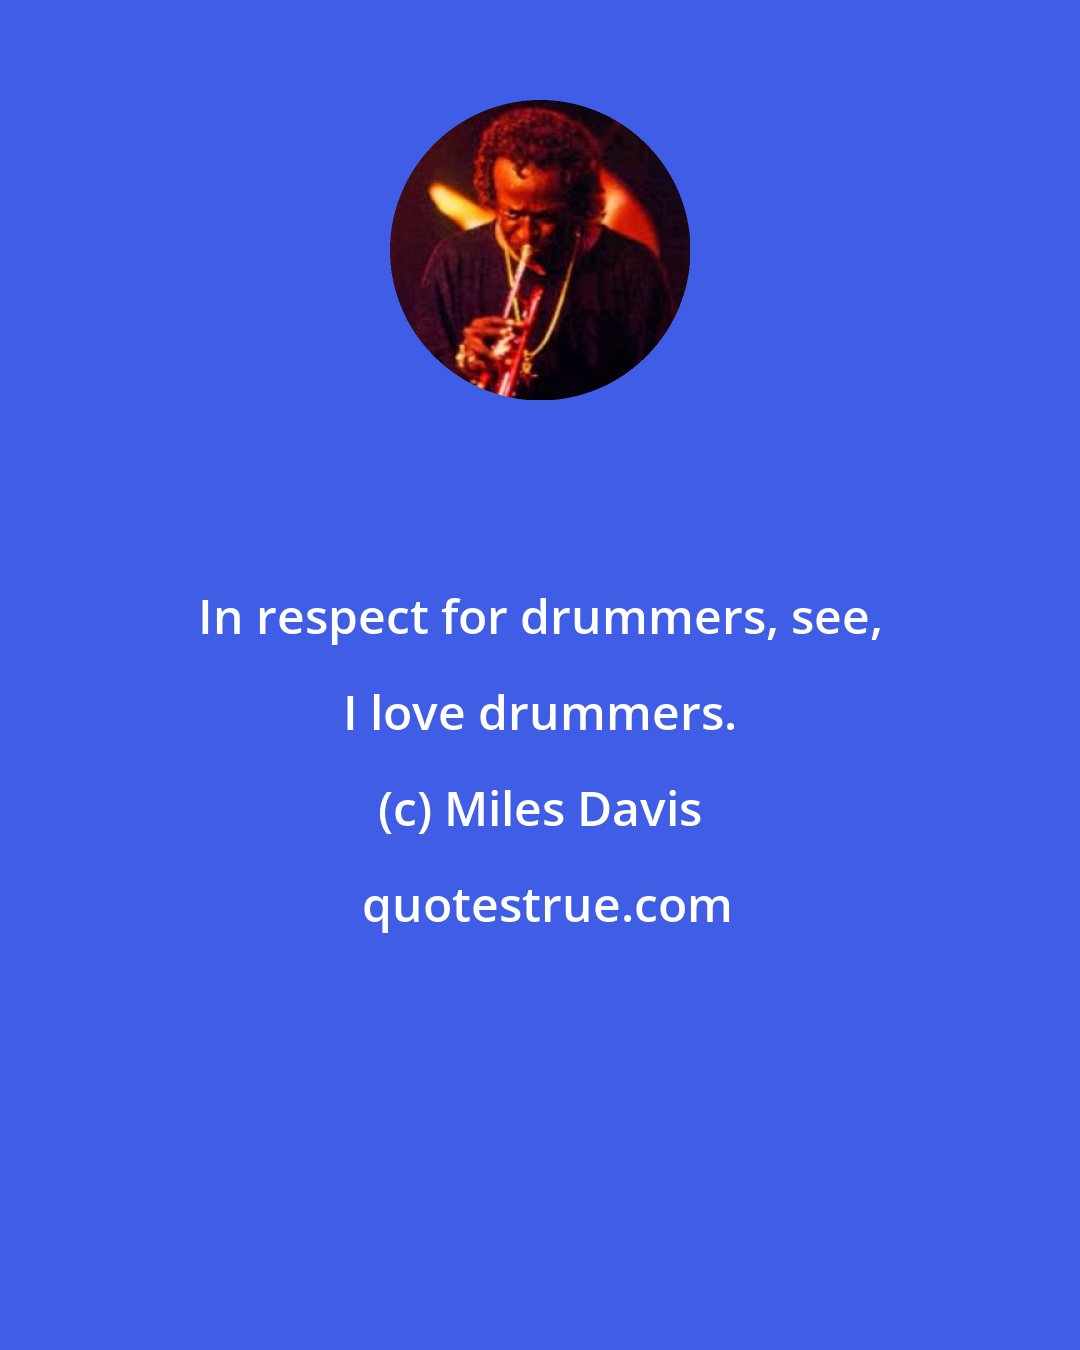 Miles Davis: In respect for drummers, see, I love drummers.